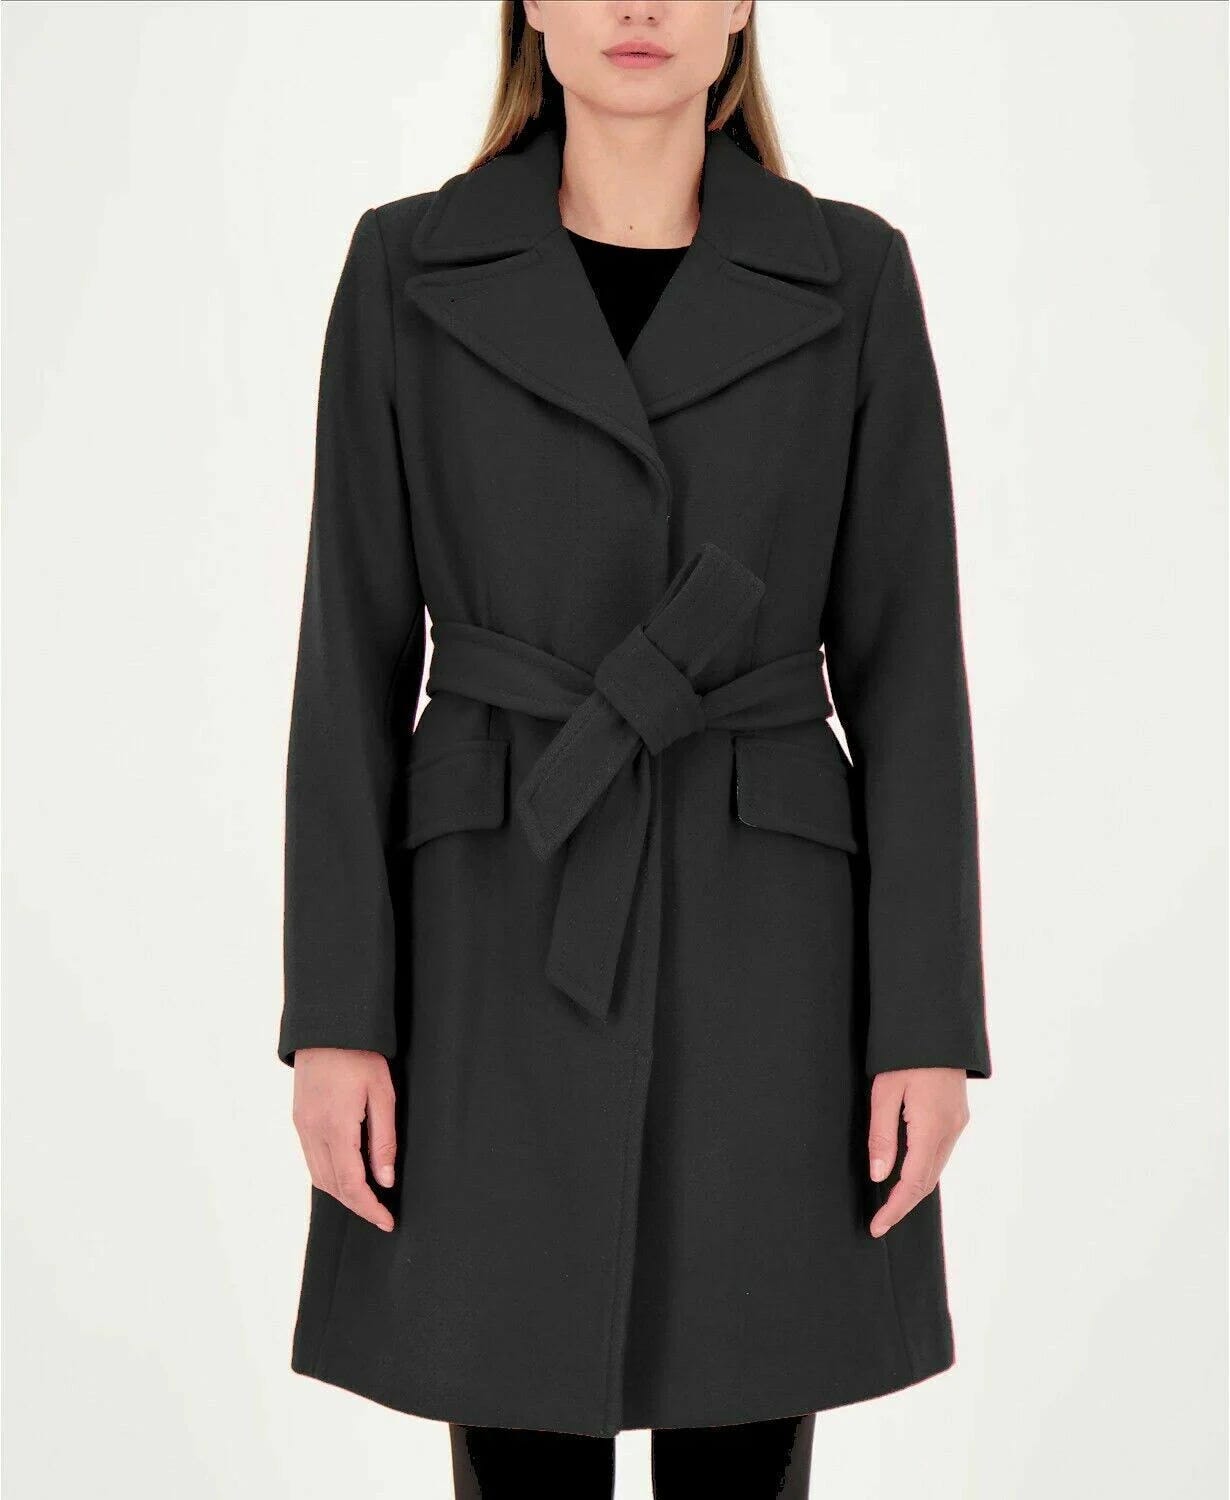 Timeless Wool Blend Midi Coat with Belt and Pockets, Black by Kate Spade | Image